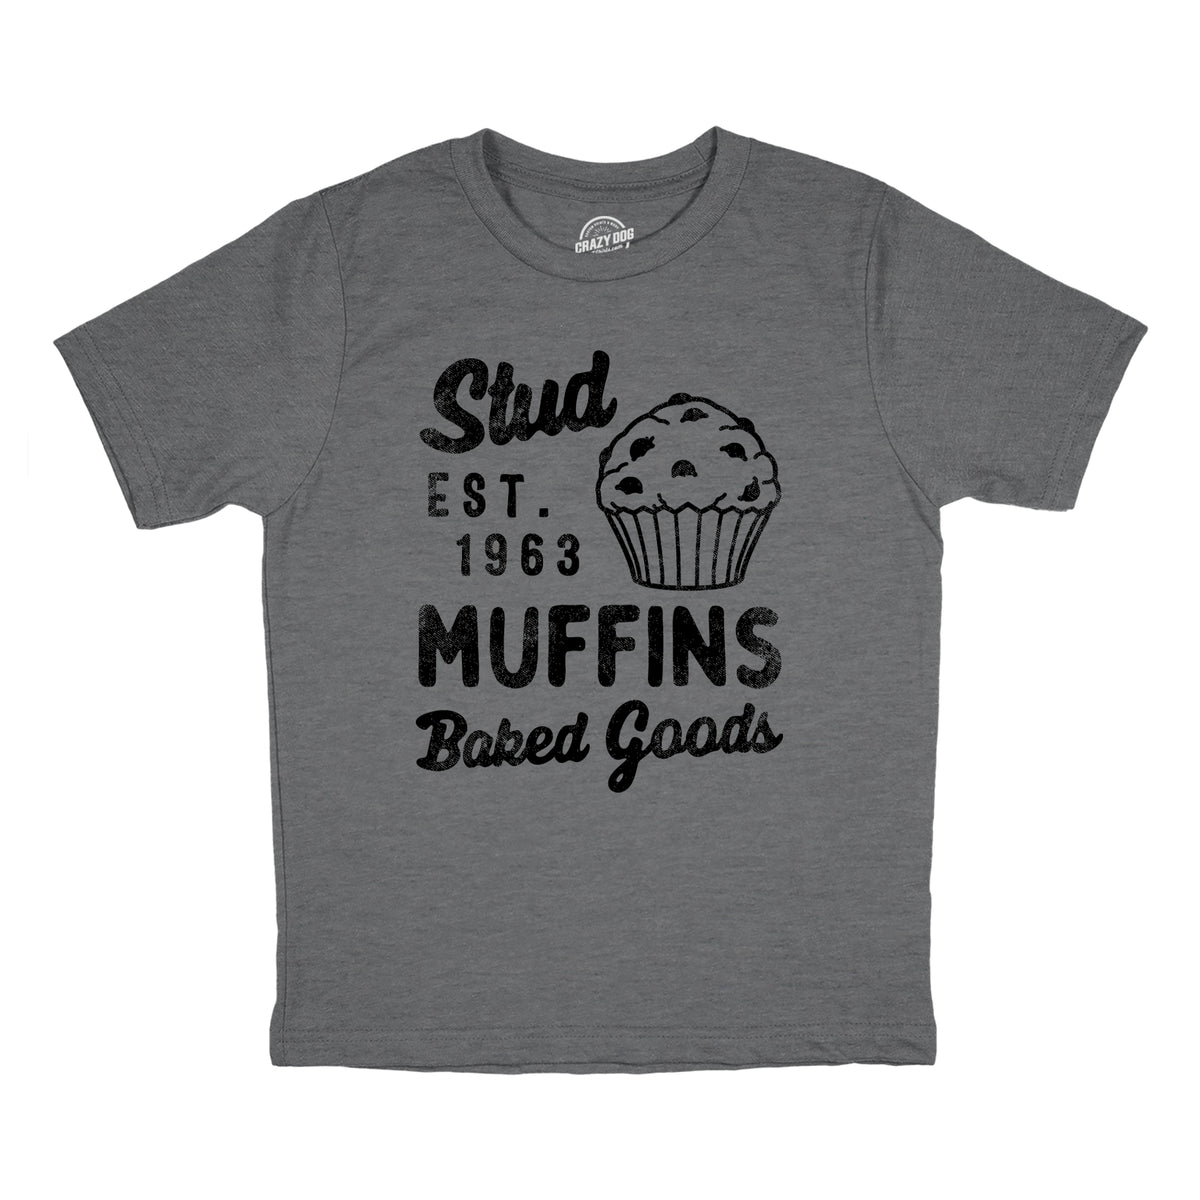 Funny Dark Heather Grey - STUD Stud Muffins Baked Goods Youth T Shirt Nerdy Food sarcastic Tee